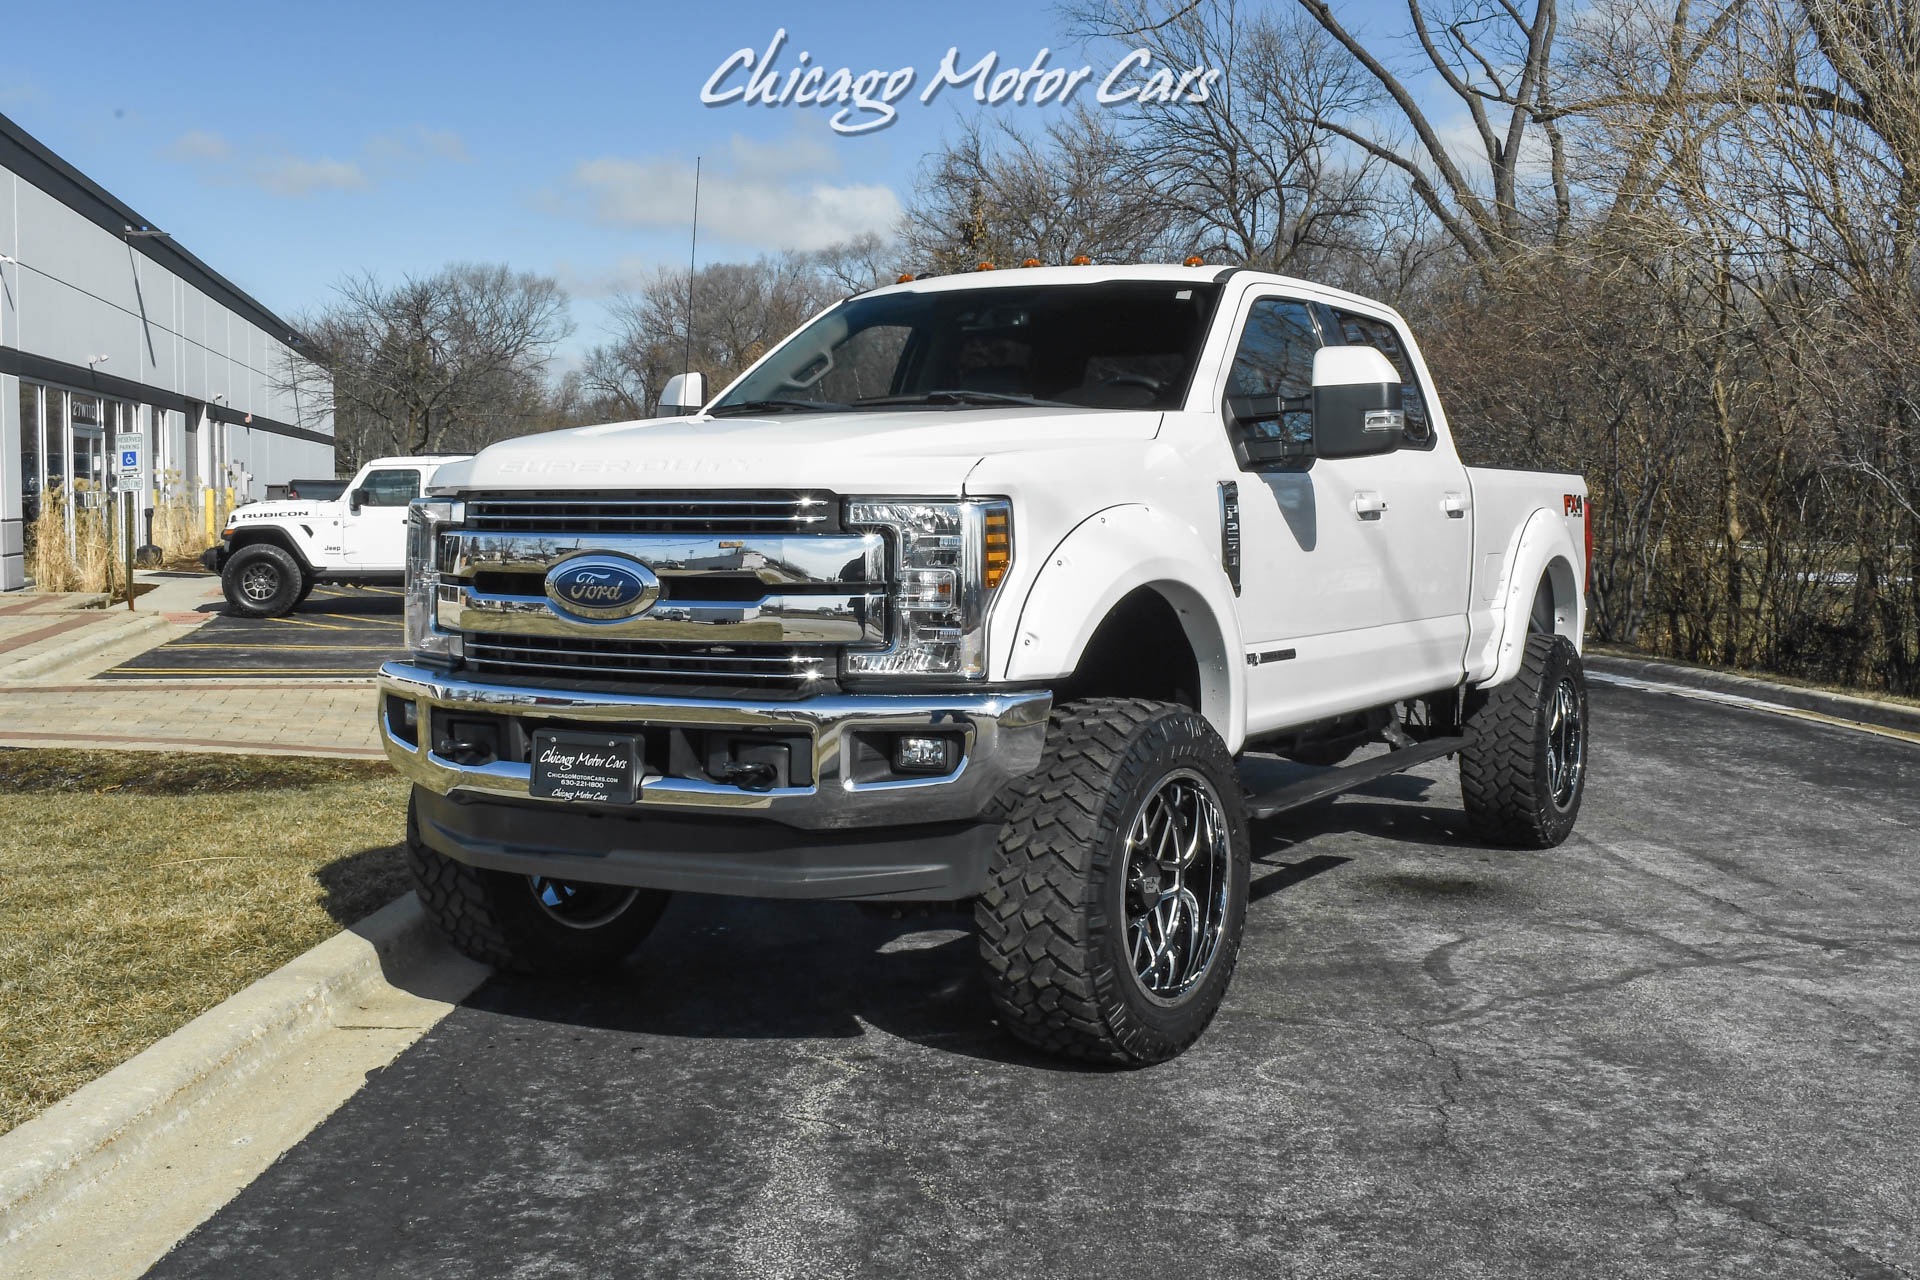 Used 2018 Ford F-250 Super Duty Lariat 4X4 Crew Cab Upgrades! FX4 Off-Road  Package! 6.7L Diesel! For Sale (Special Pricing) | Chicago Motor Cars Stock  #18757